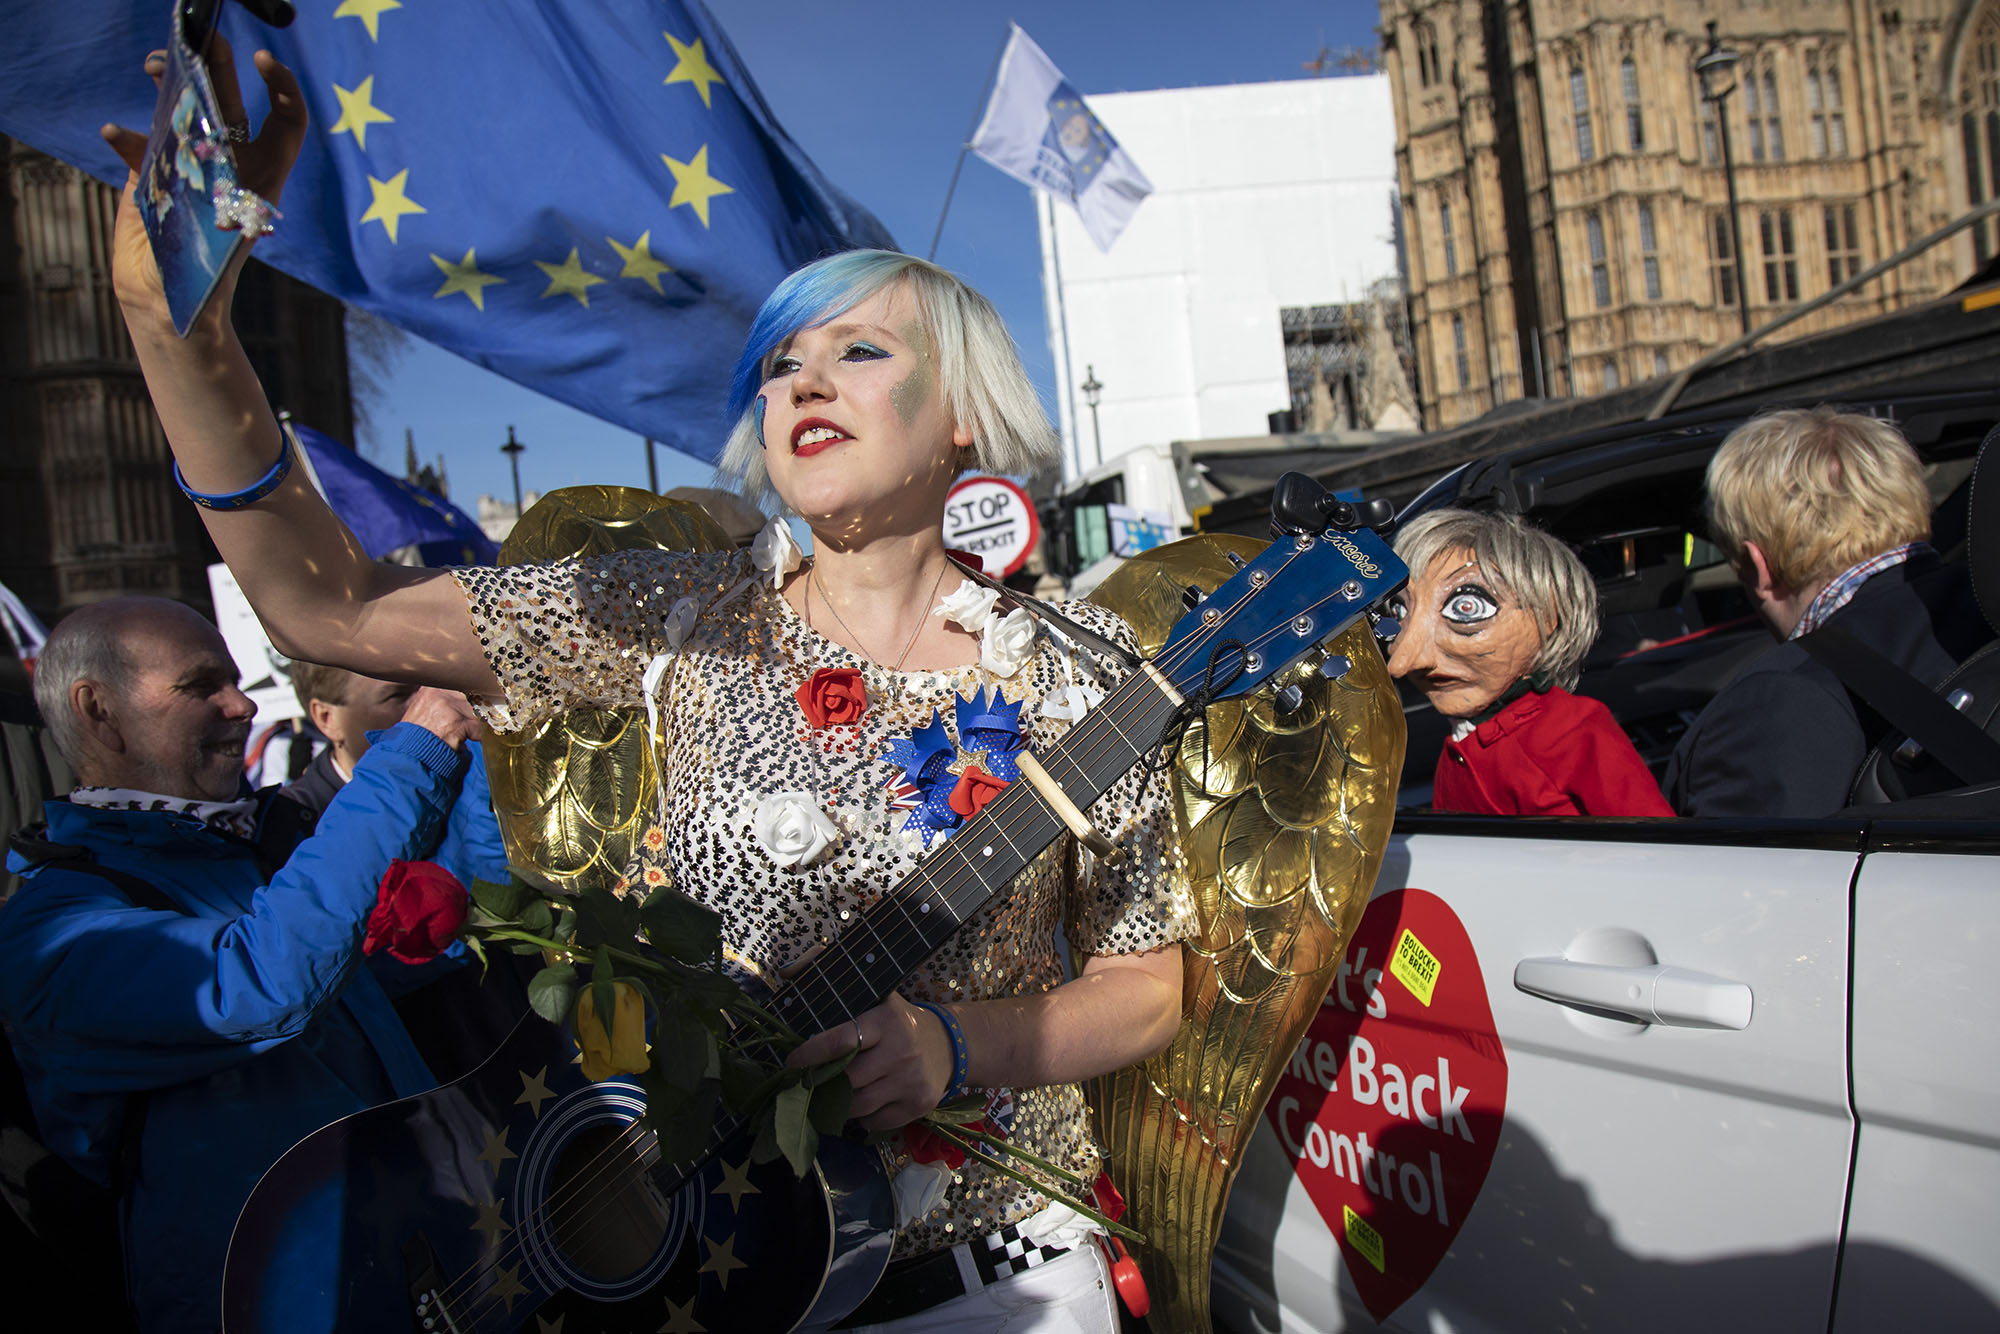  Anti Brexit demonstrator dressed as an angel at the protest opposite Parliament as MPs debate and vote on amendments to the withdrawal agreement plans on 14th February 2019. 